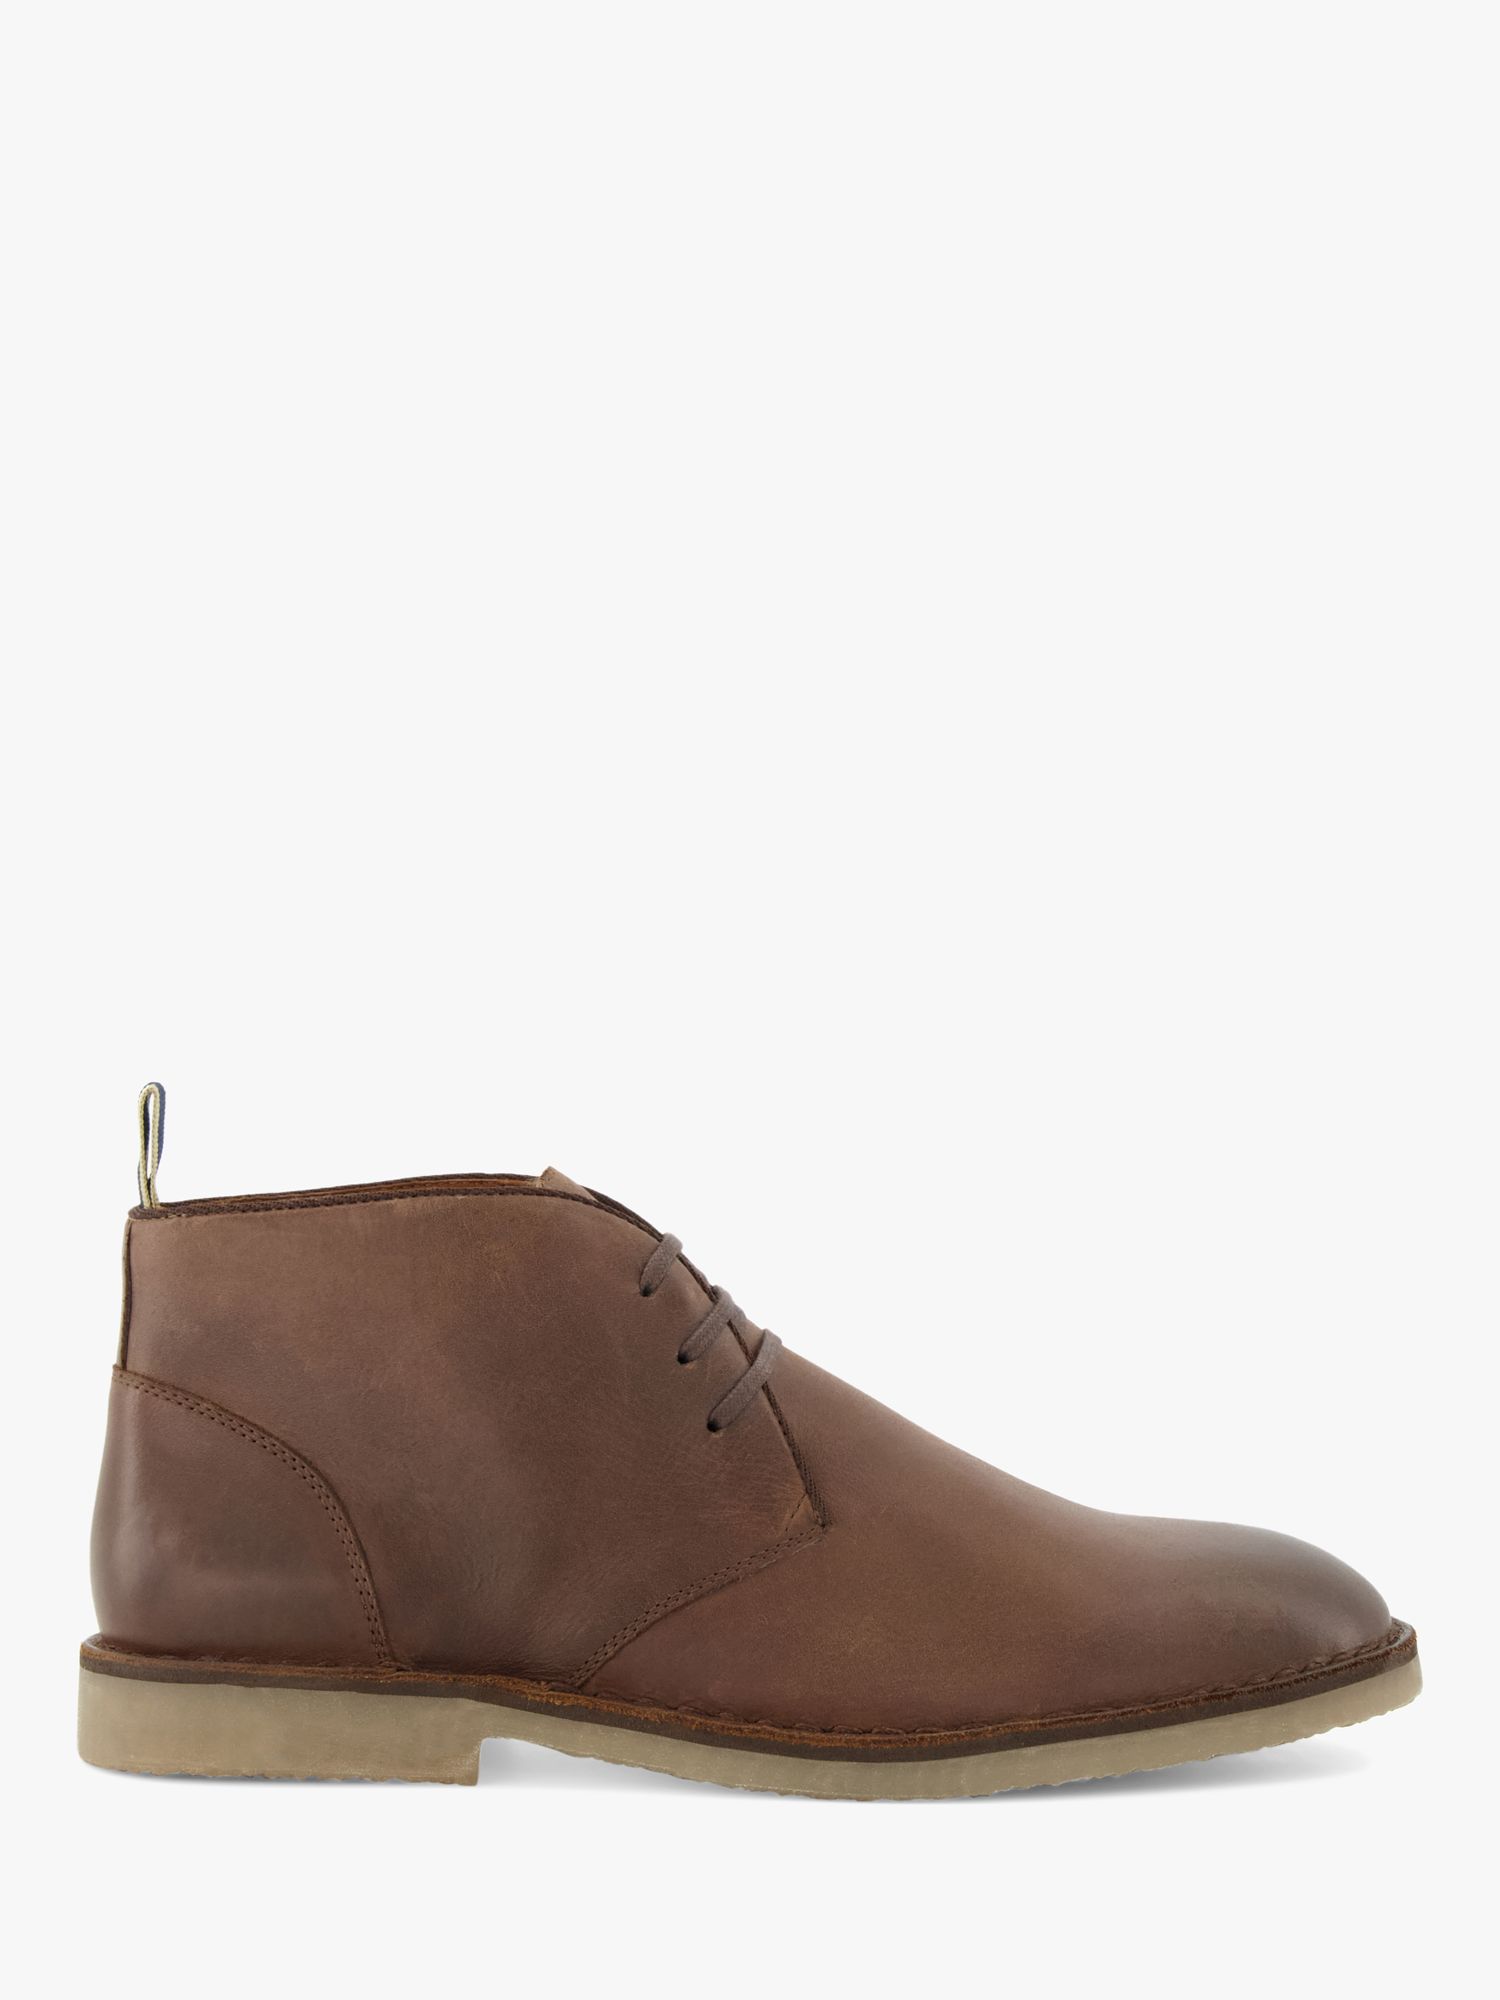 Dune Cashed Leather Casual Chukka Boots, Brown at John Lewis & Partners